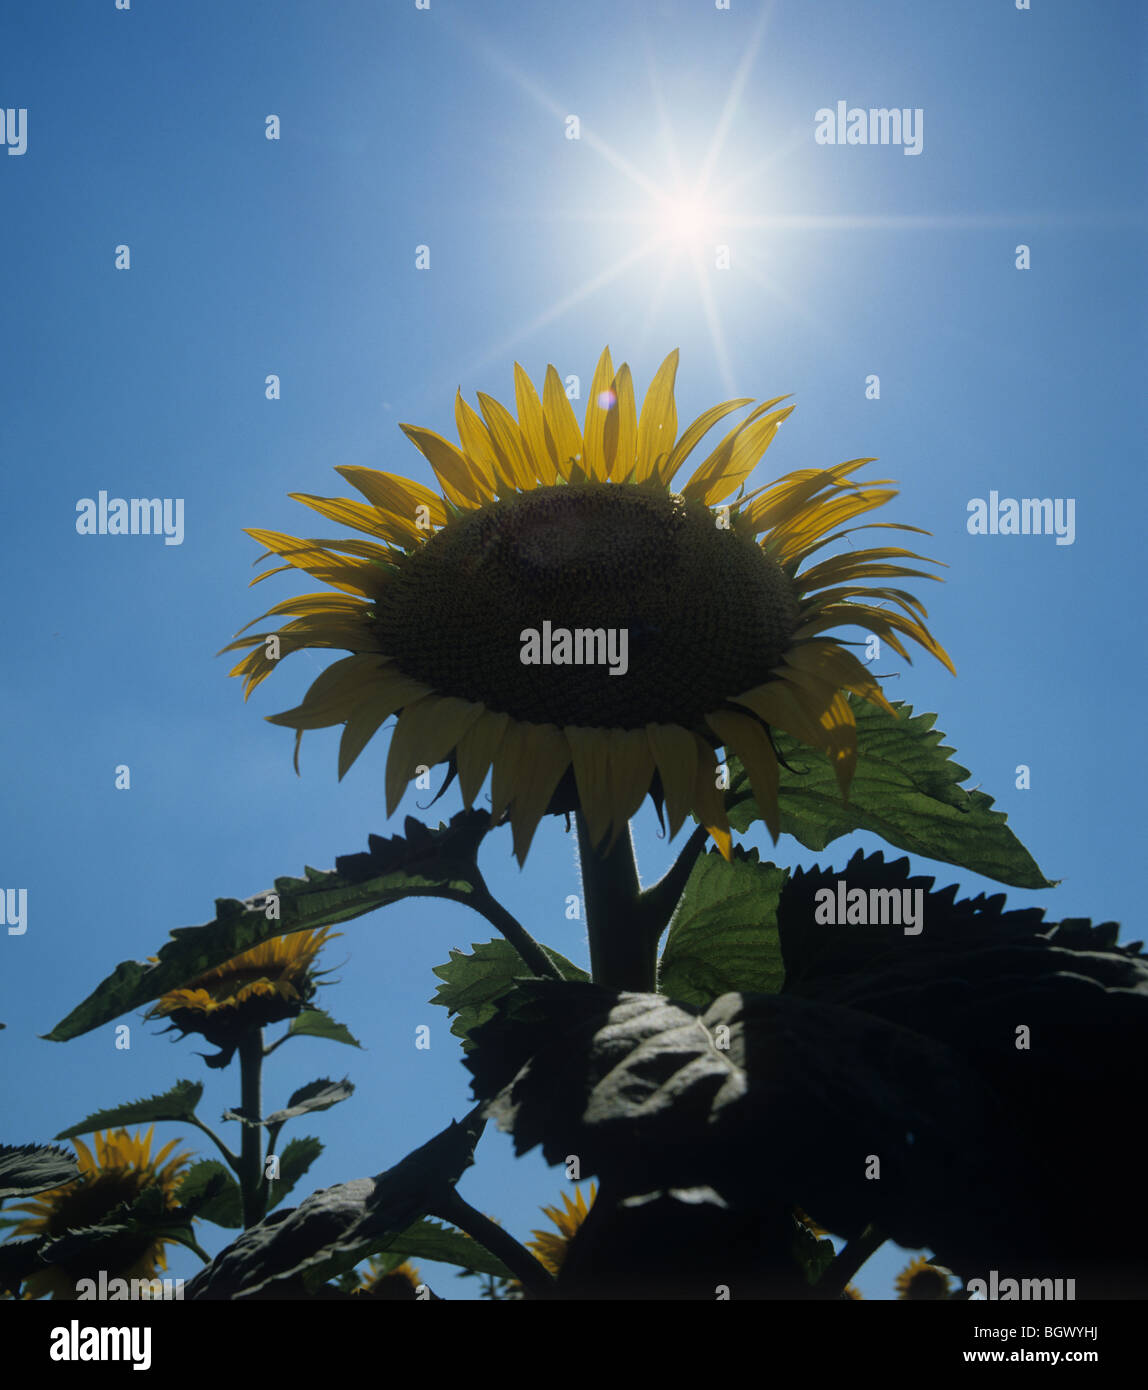 Yellow sunflower head against a bright summer sun starburst and deep blue sky, Tuscany, Italy Stock Photo